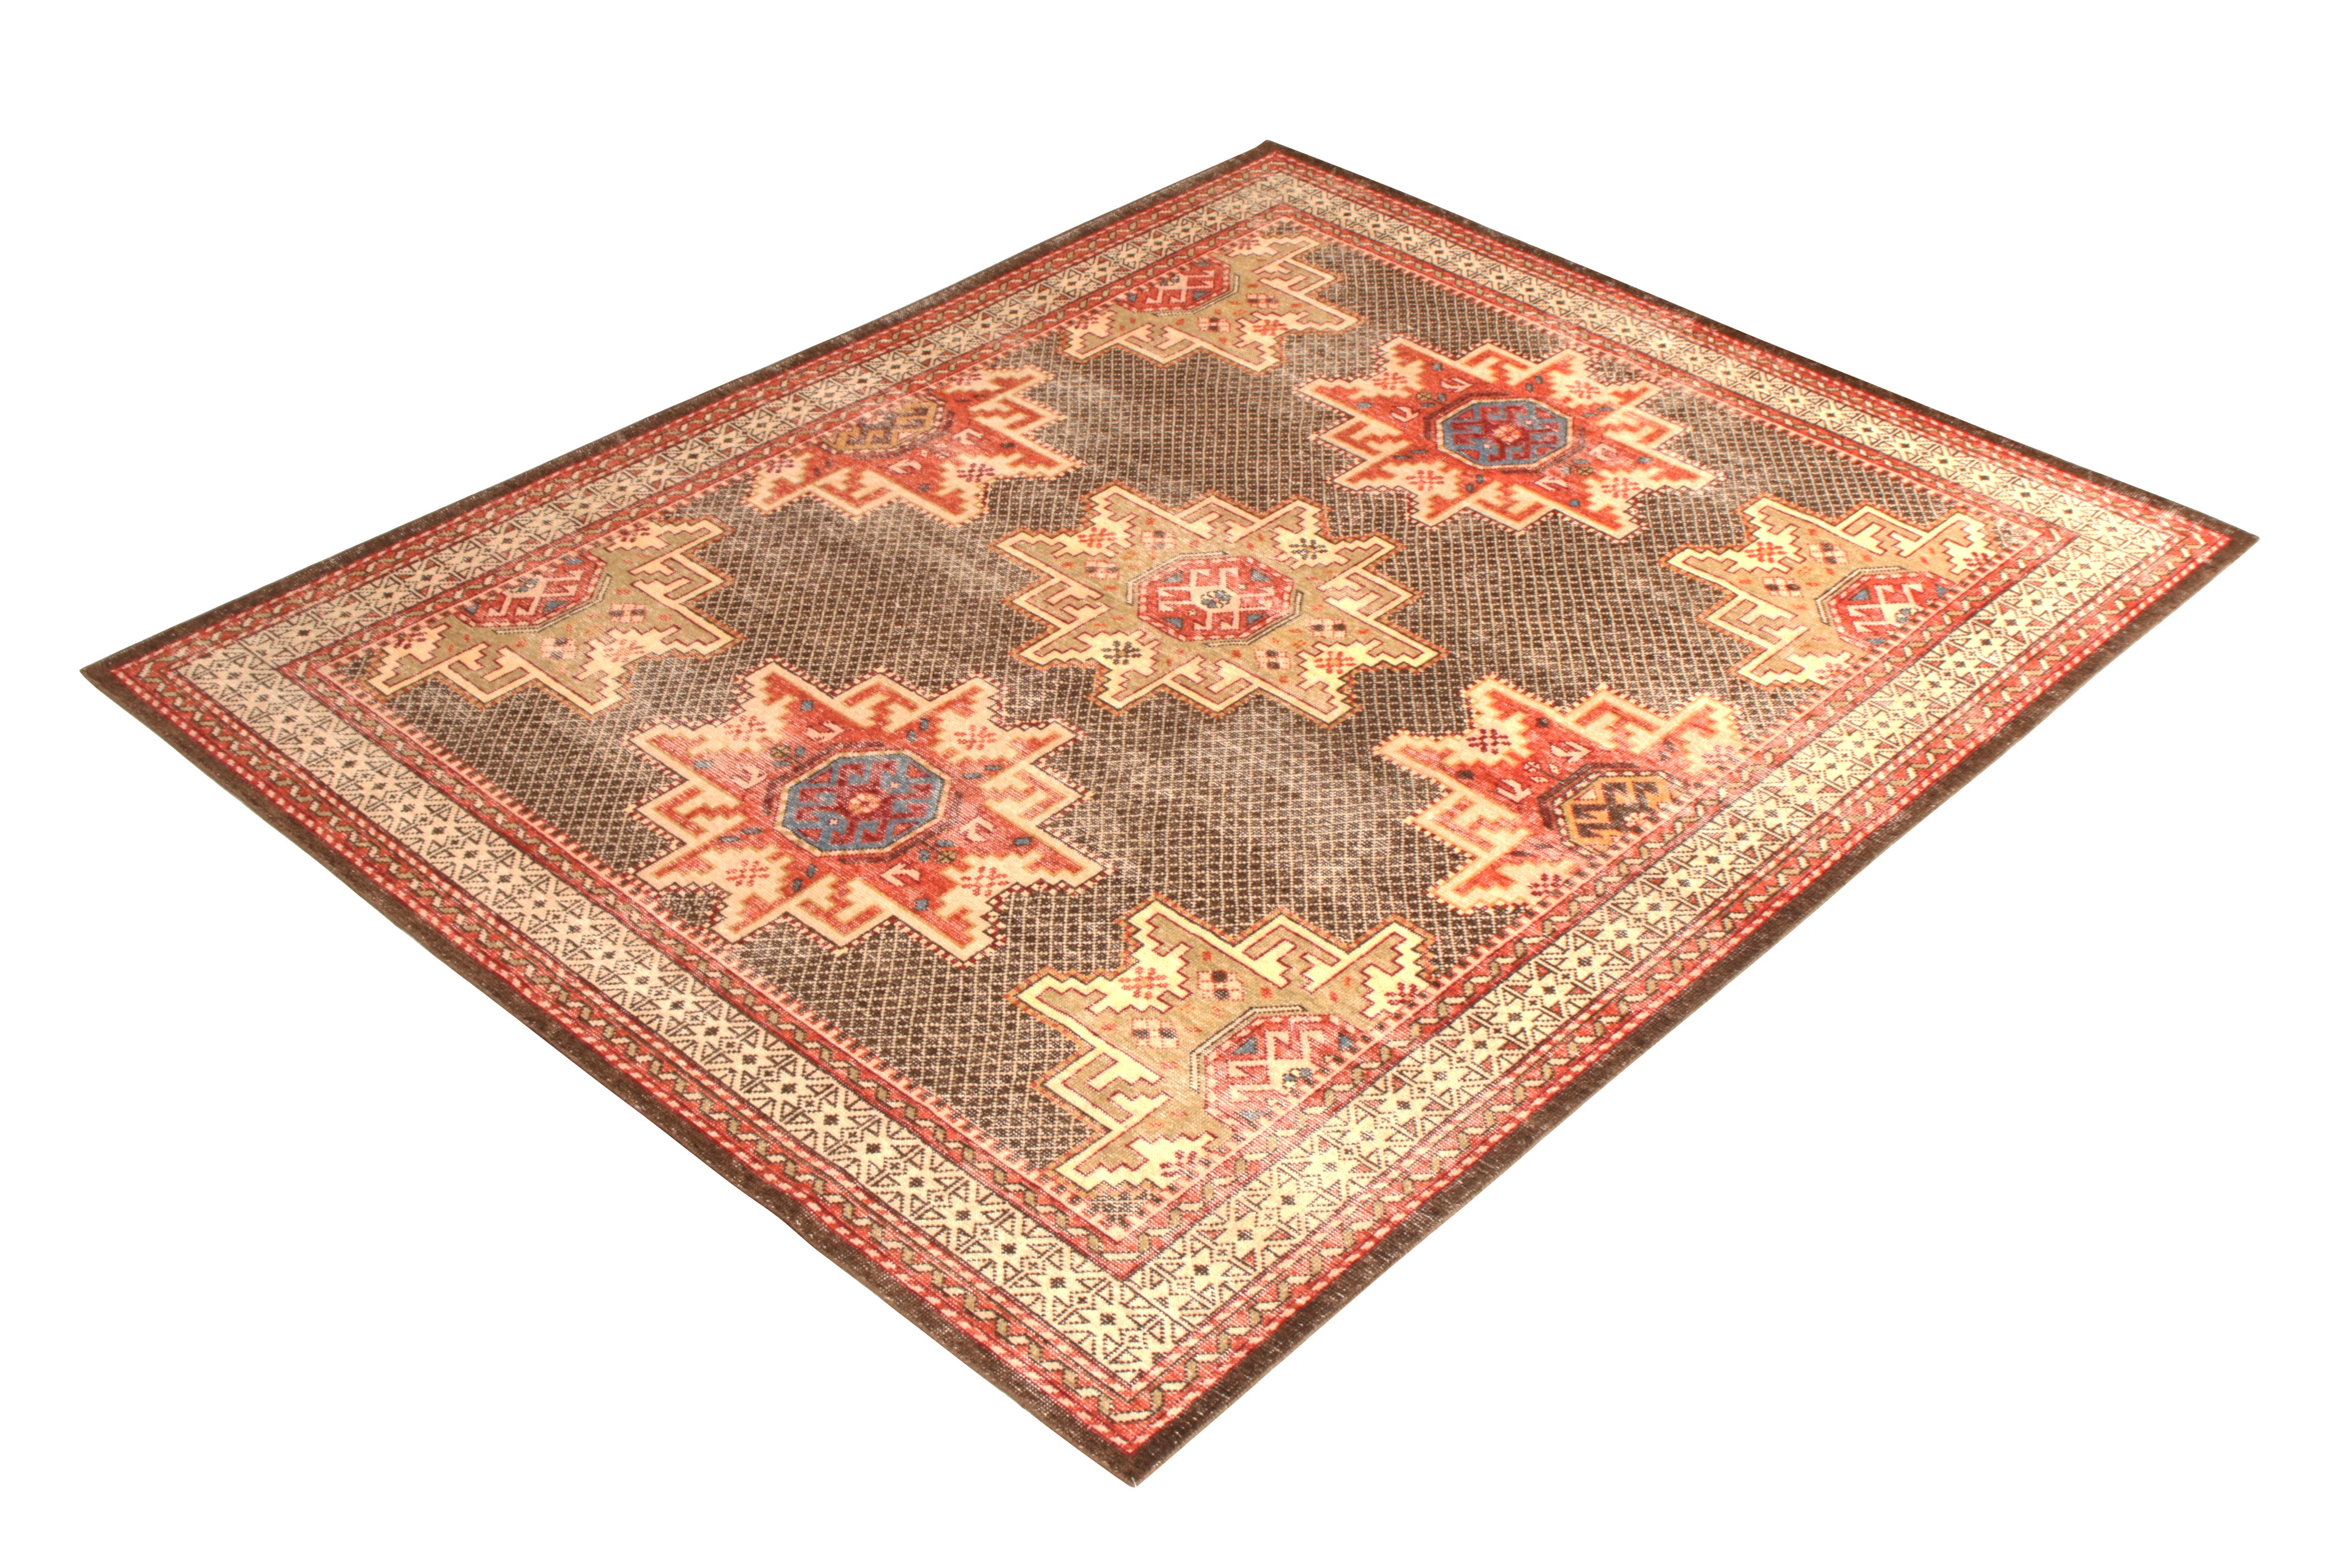 Color: Beige, brown, and red
Style: 19th century Caucasian

New distressed rug
Size: 7'10